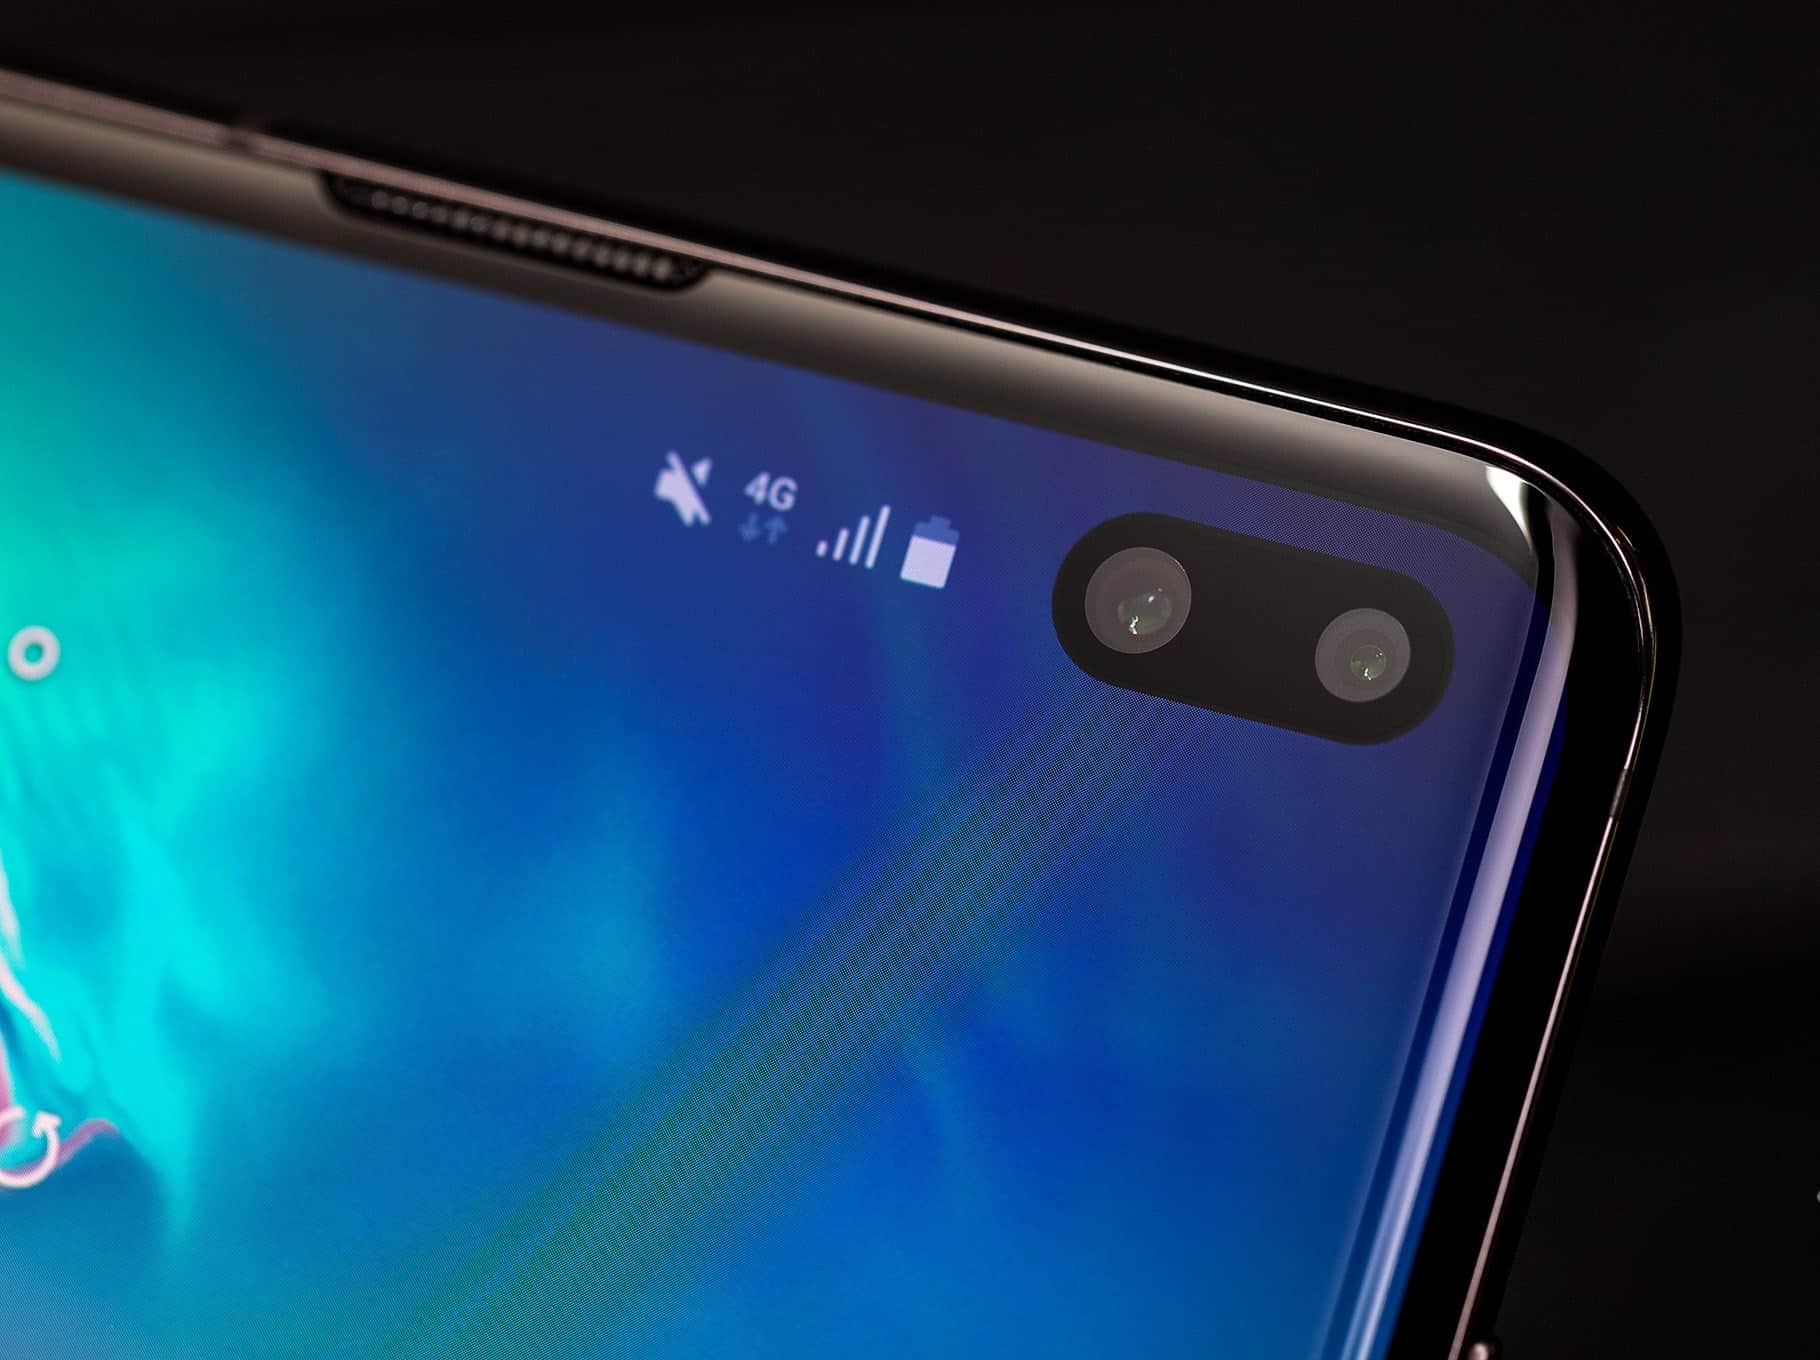 Top Samsung Galaxy S10 features